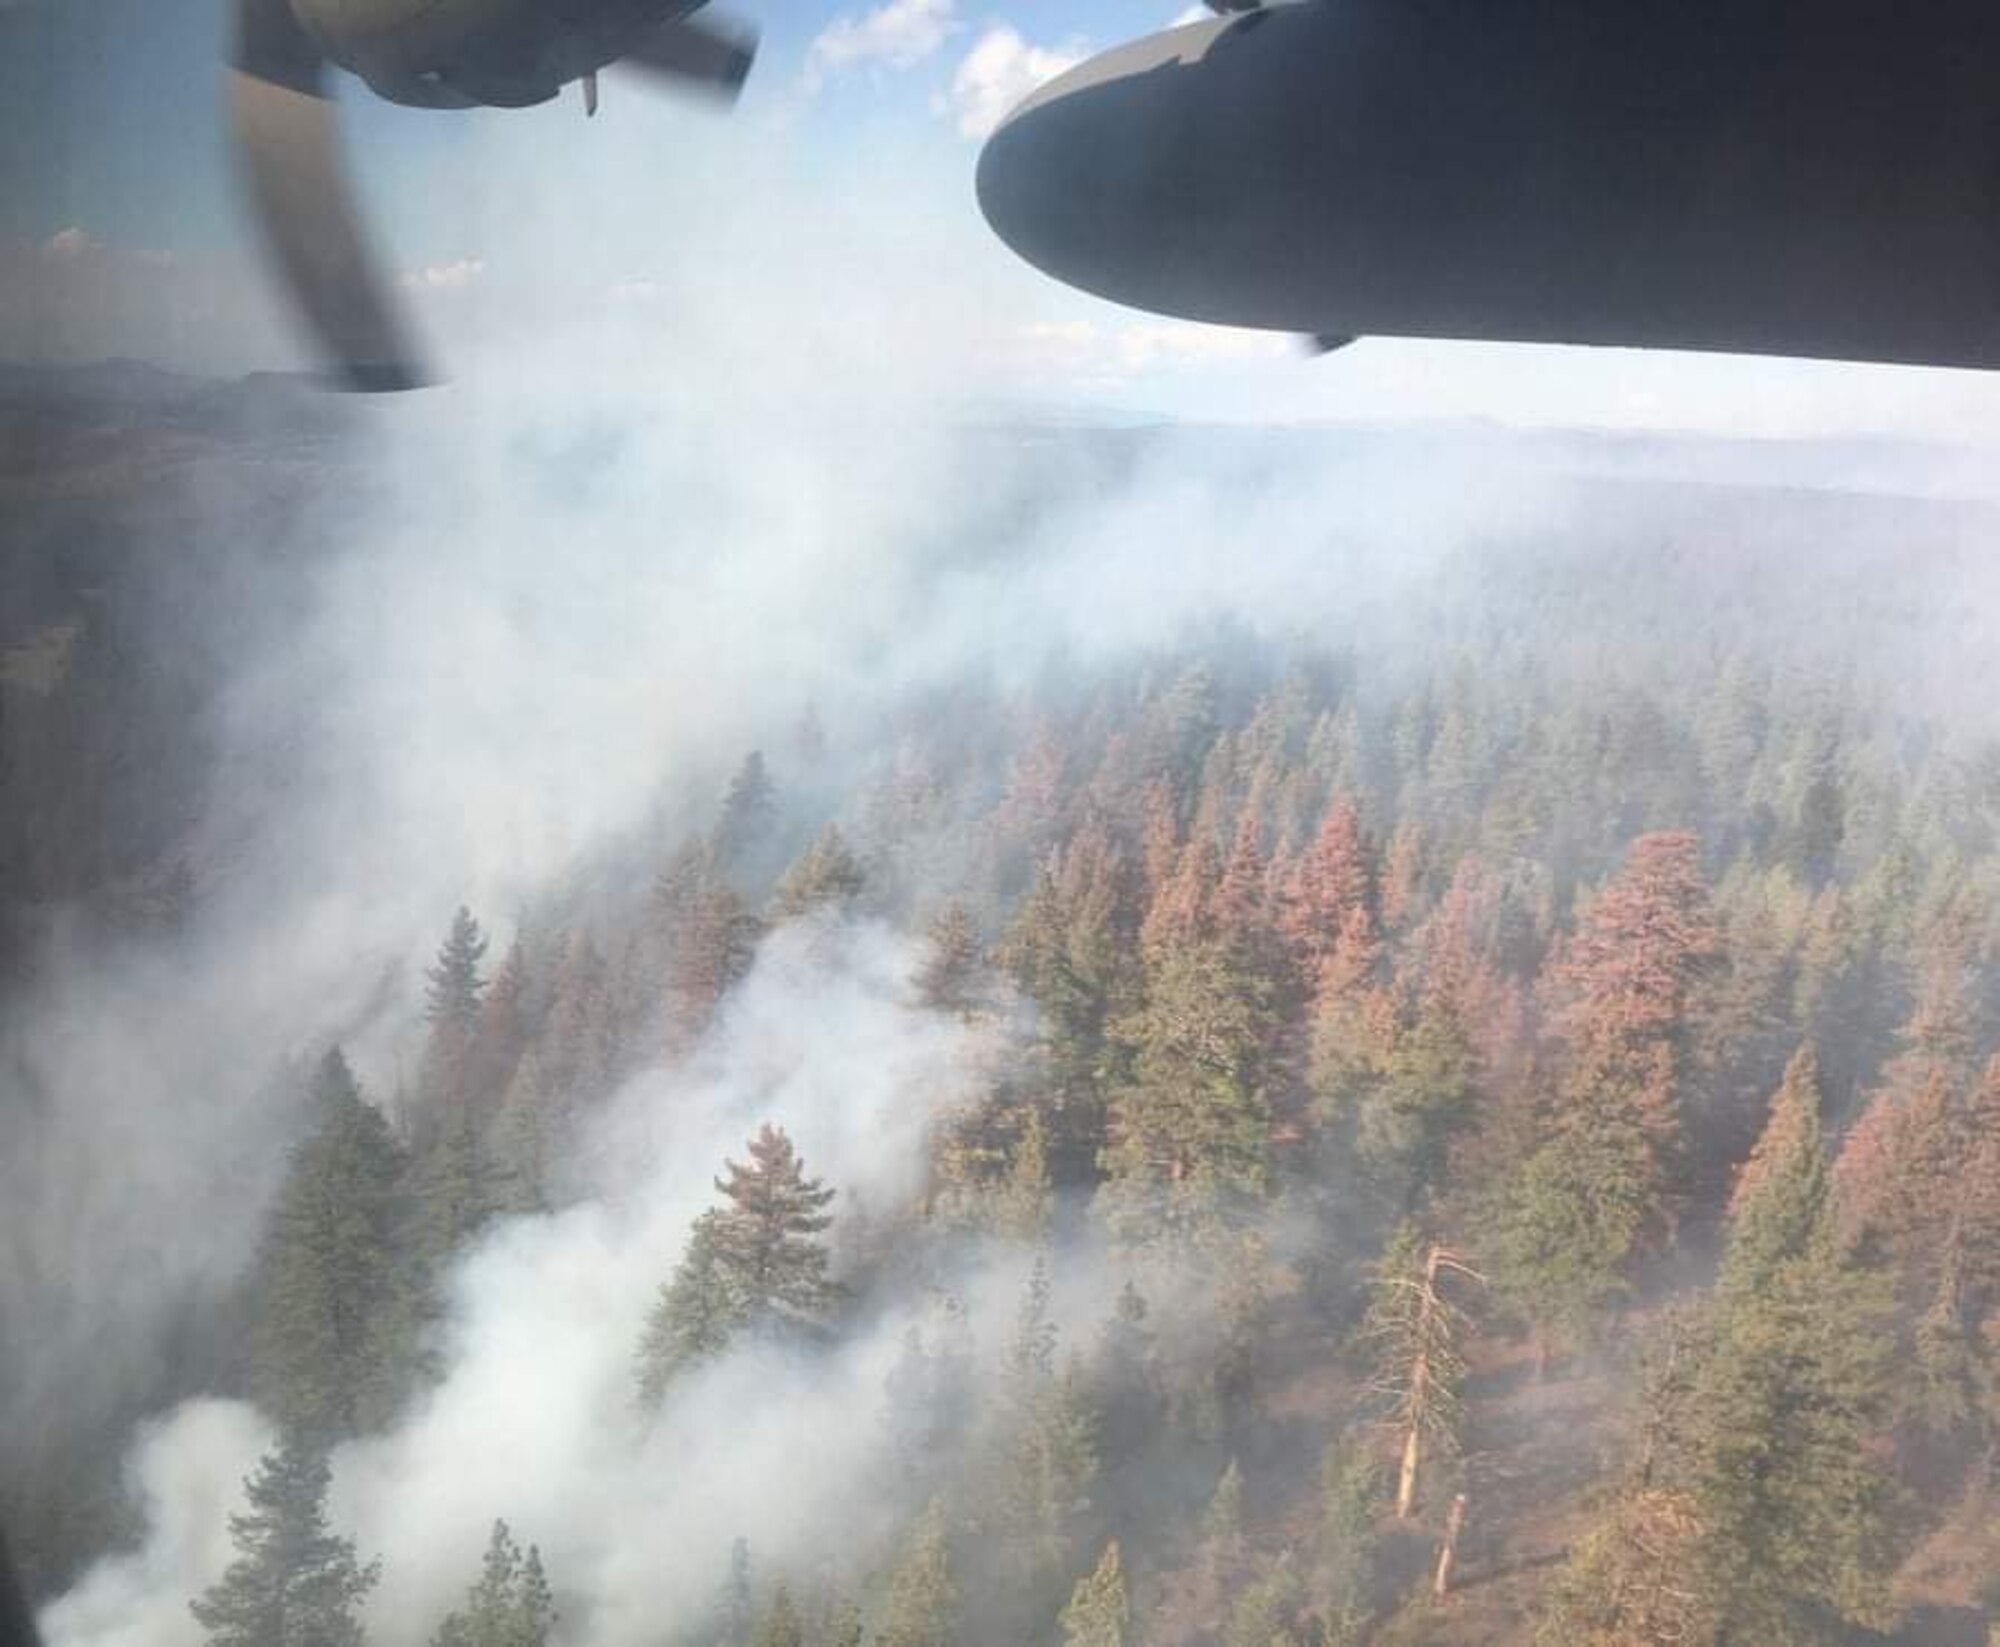 An aerial view of a smoky forest with a line of fire retardant covering a segment of trees.